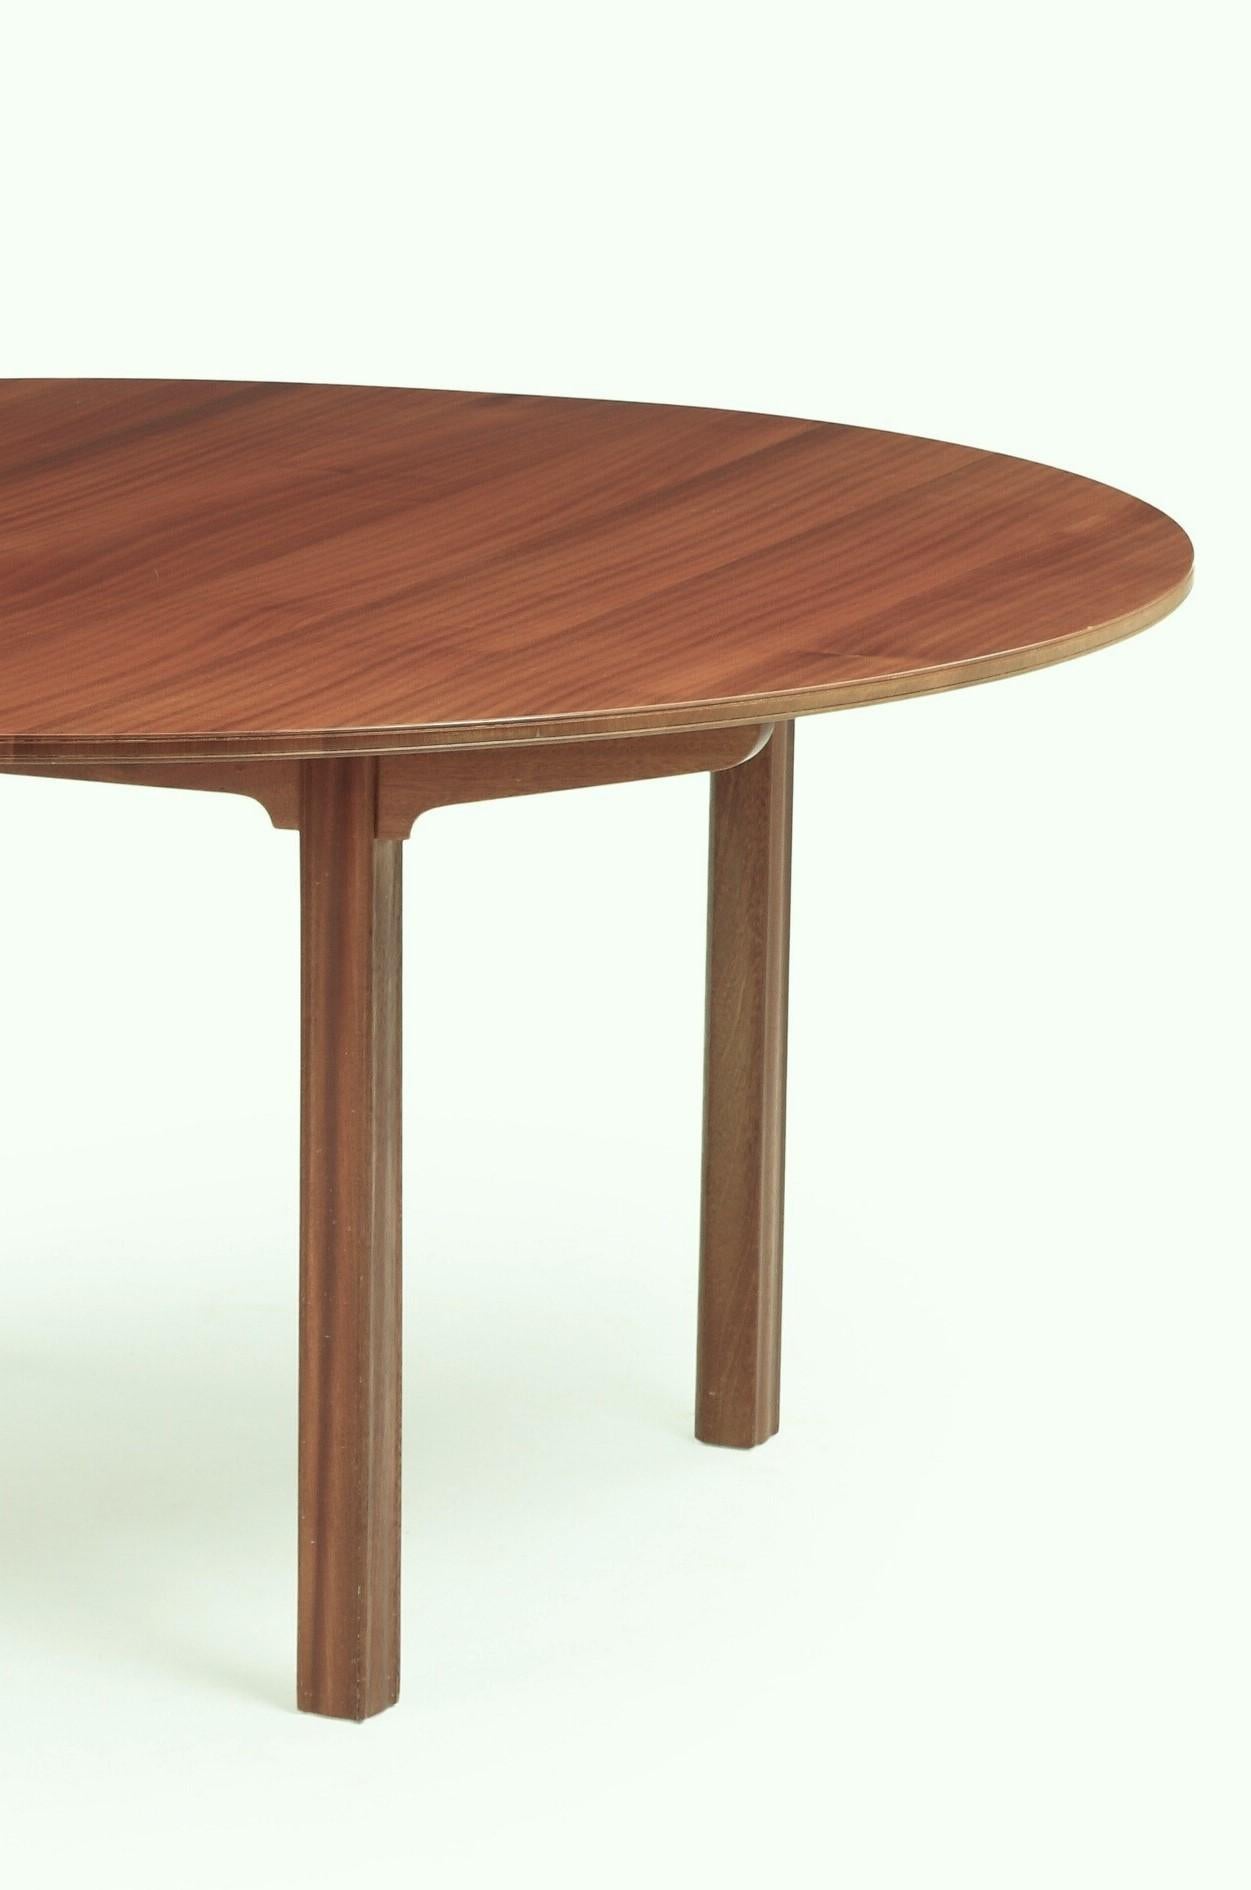 Scandinavian Modern Kaare Klint Round Dining Table Made of Solid Mahogany by Rud Rasmussen For Sale